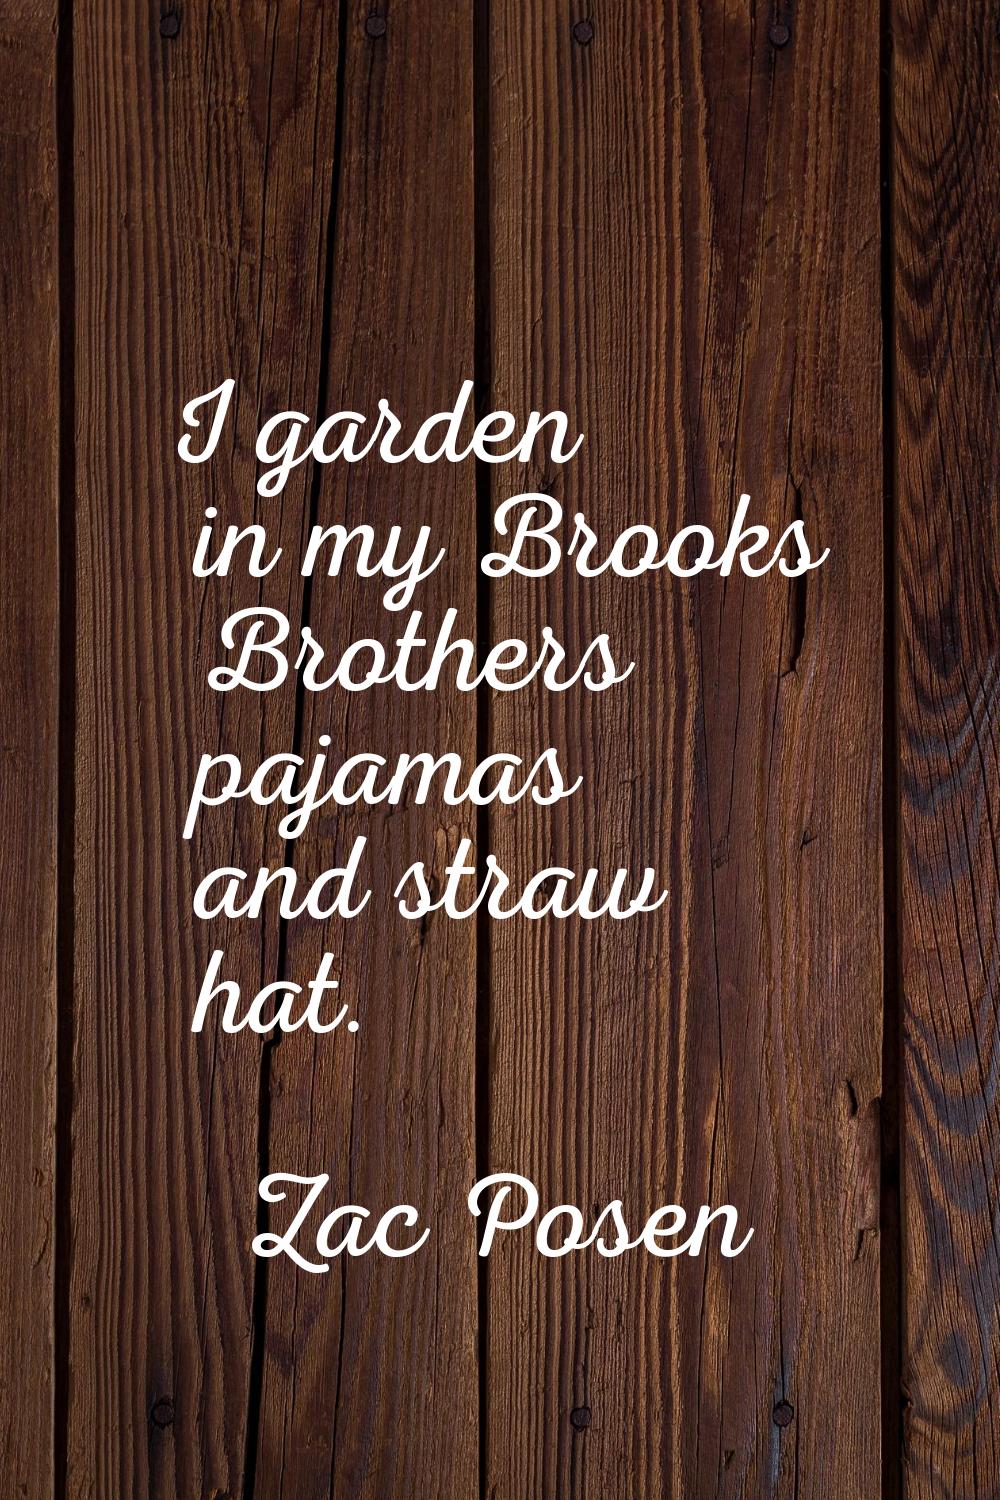 I garden in my Brooks Brothers pajamas and straw hat.